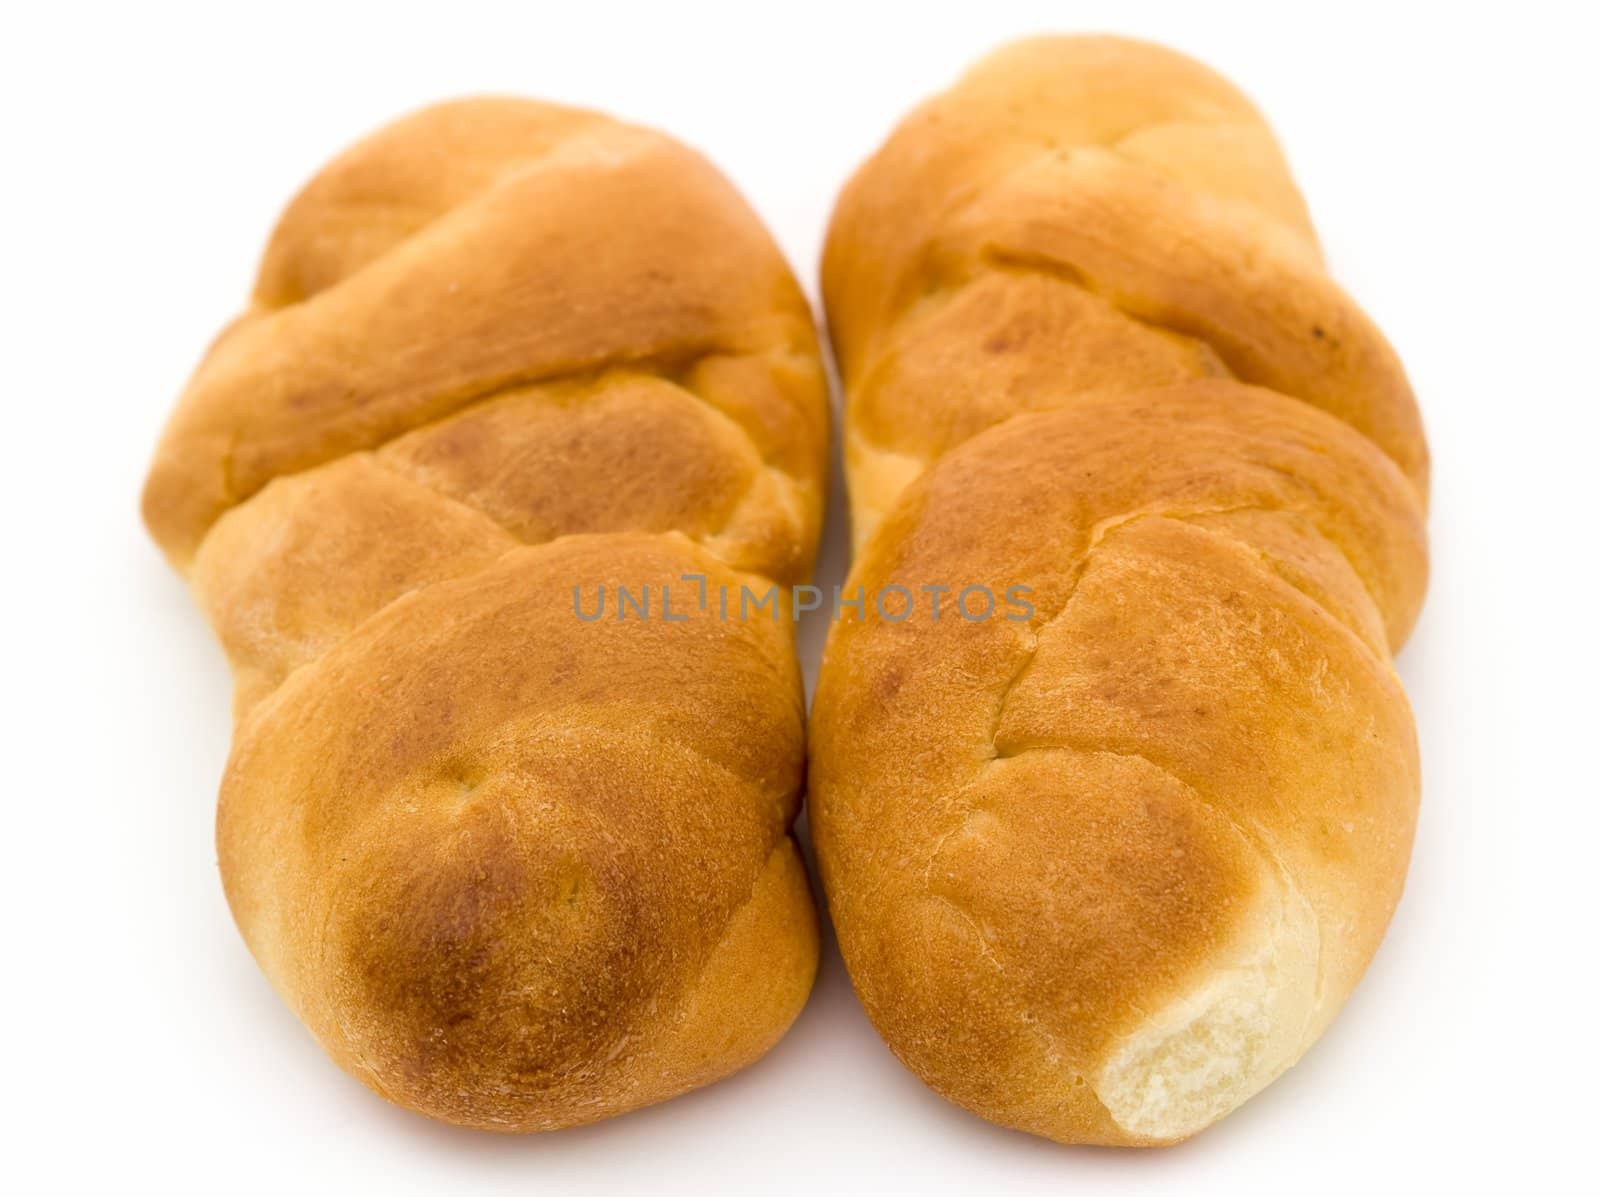 Two appetizing buns on a white background